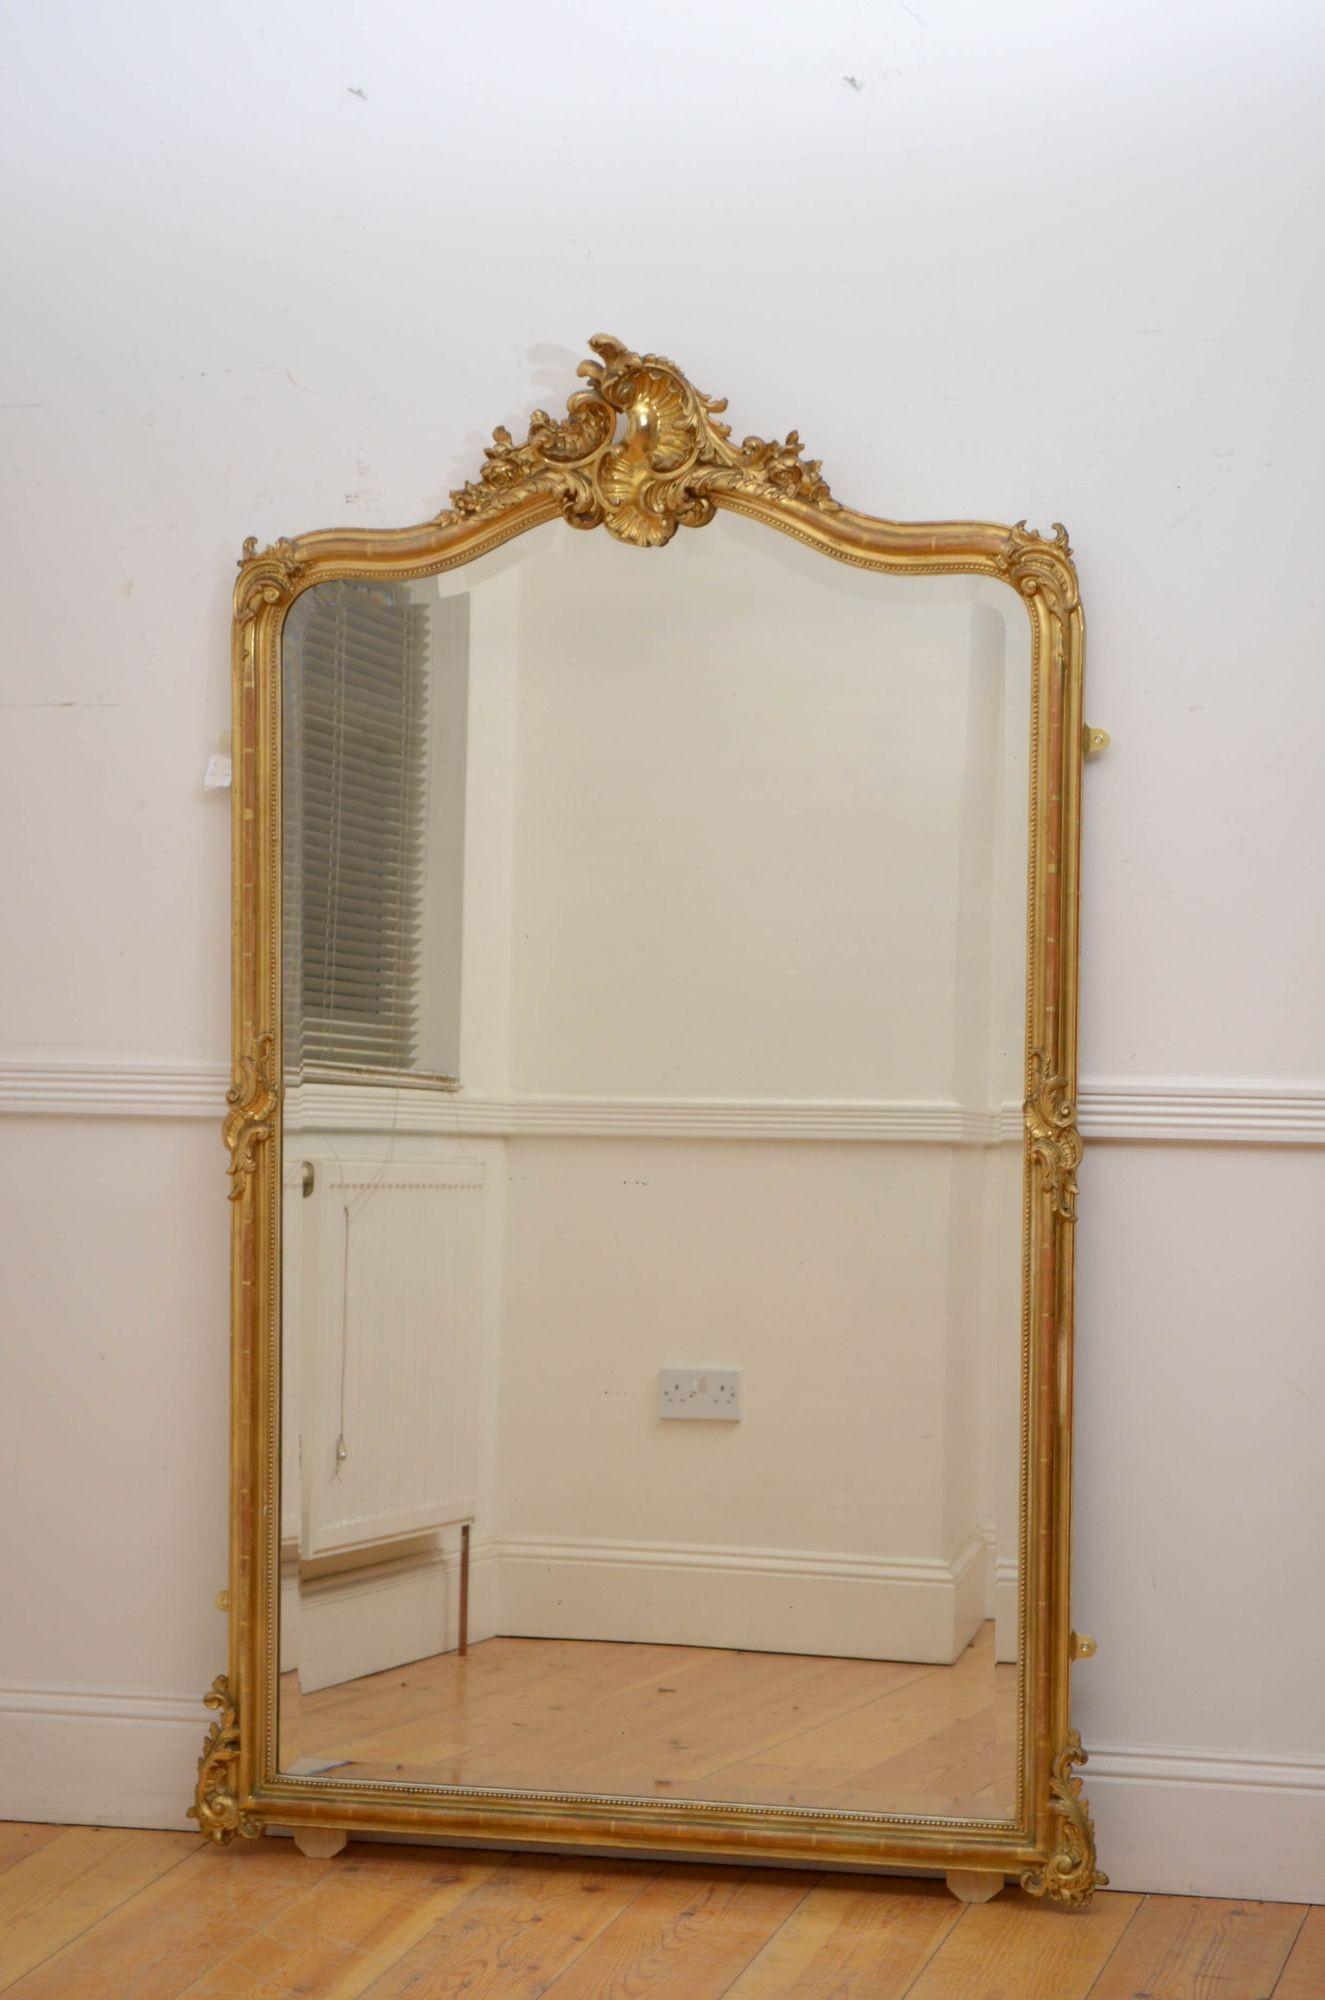 Sn5371 Very attractive XIXth century French giltwood wall mirror, having original bevelled edge plate with minor imperfections in gilded and moulded frame with acanthus scrolls to top corners and shell crest flanked by floral motifs to the centre.